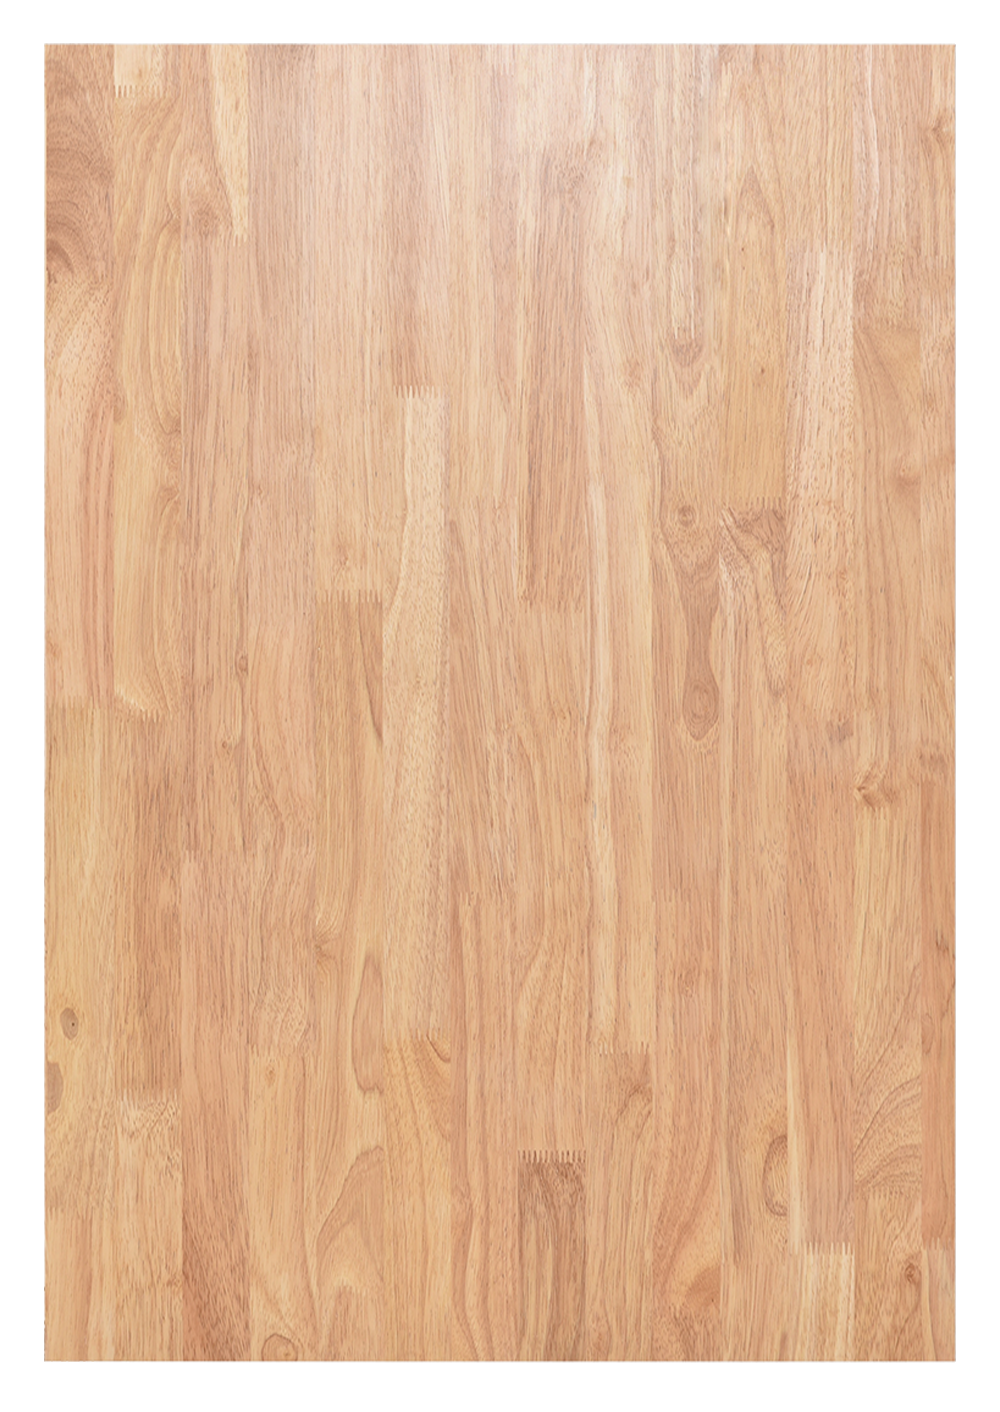 TOP TABLE TIMBER 1200MM X 800MM NATURAL